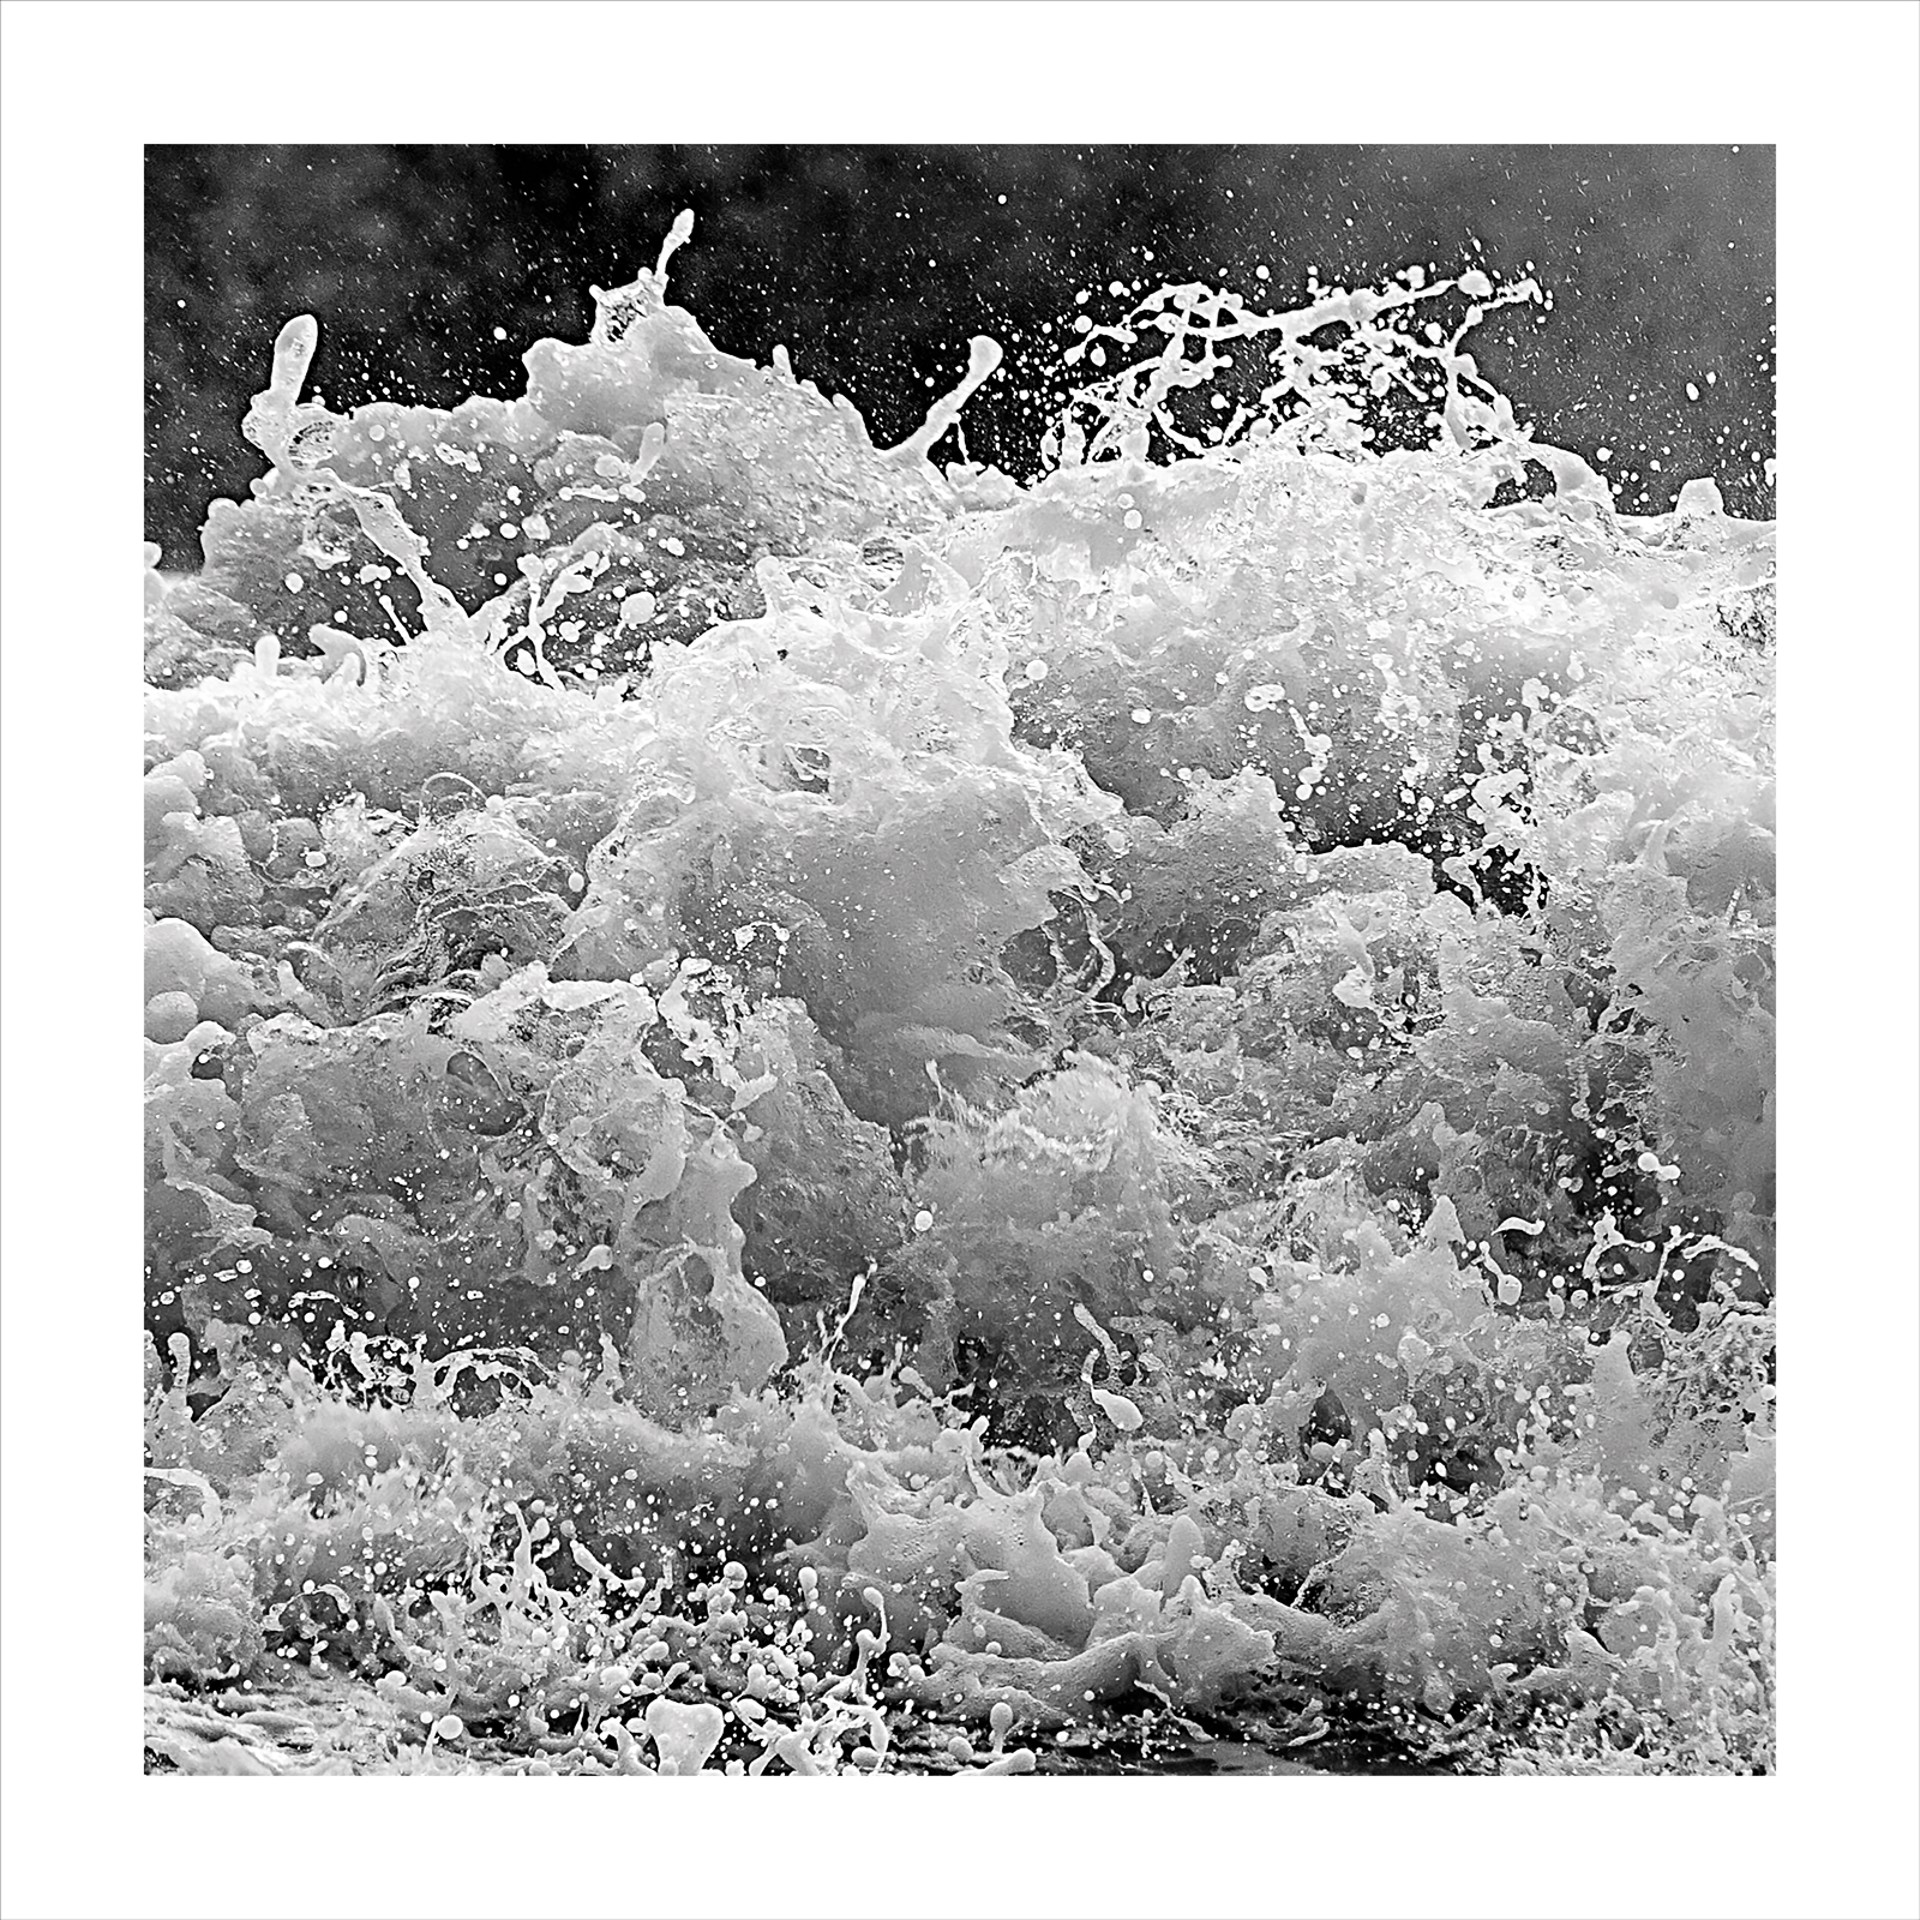 Force Of Nature-   5S5A8422 (Three inch border-white frame) by Bob Tabor